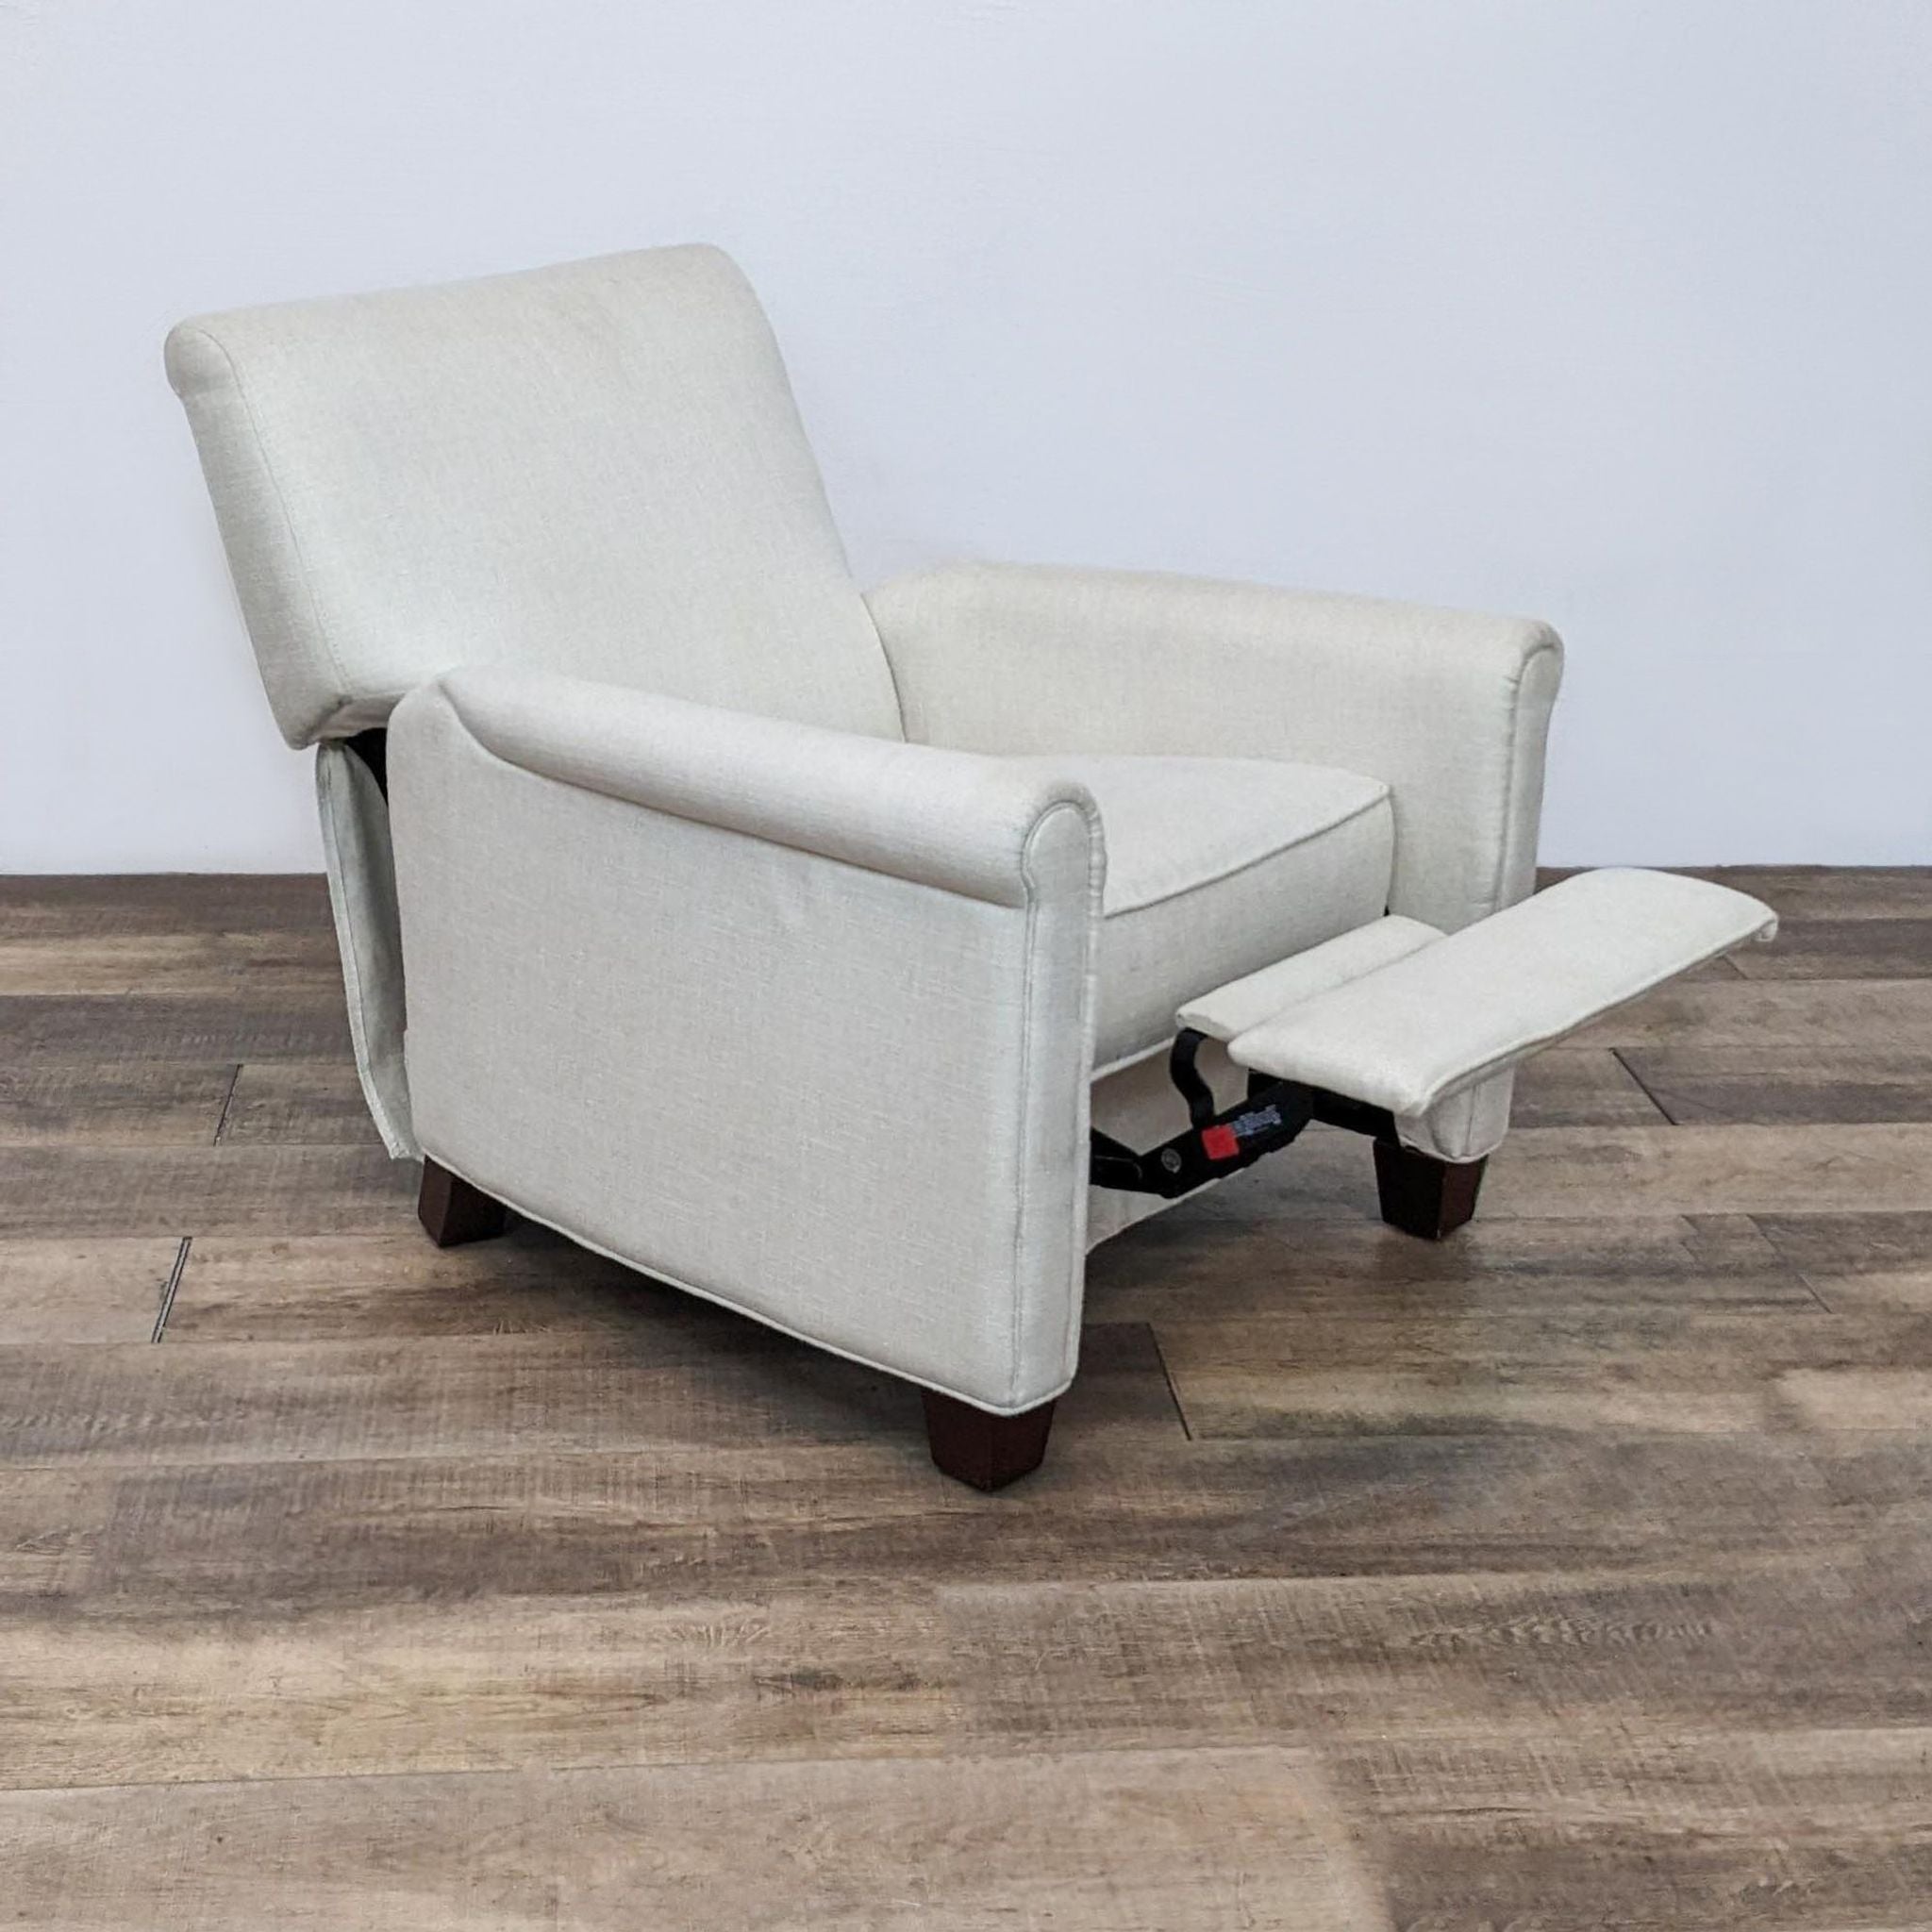 Beige Pottery Barn recliner chair with extended footrest, angled view on wooden floor.